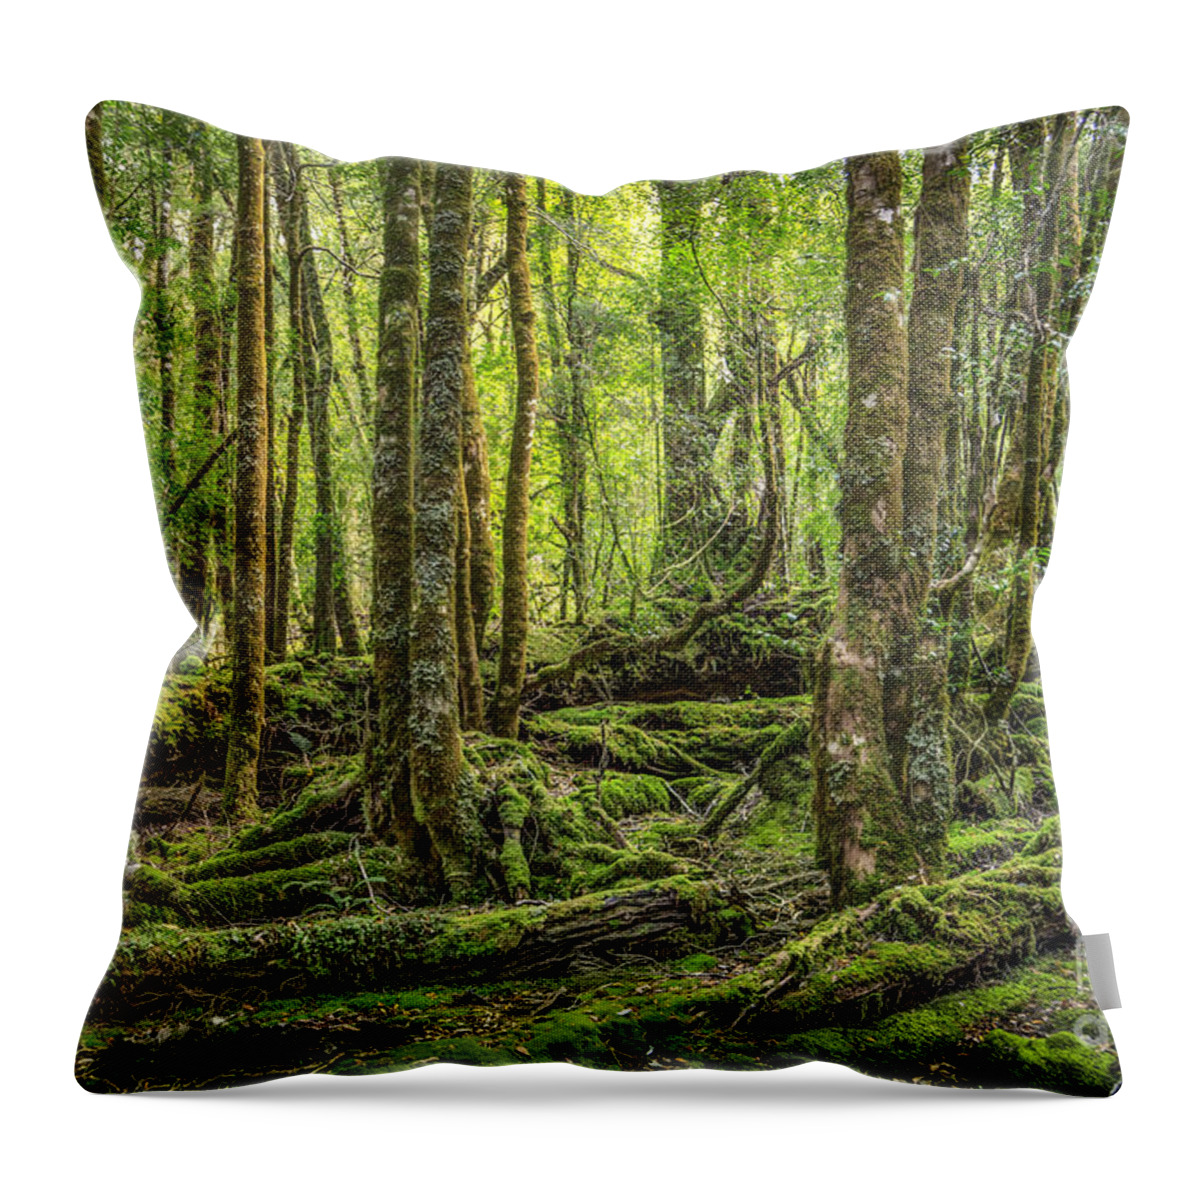 Kremsdorf Throw Pillow featuring the photograph Enchanted Forest by Evelina Kremsdorf